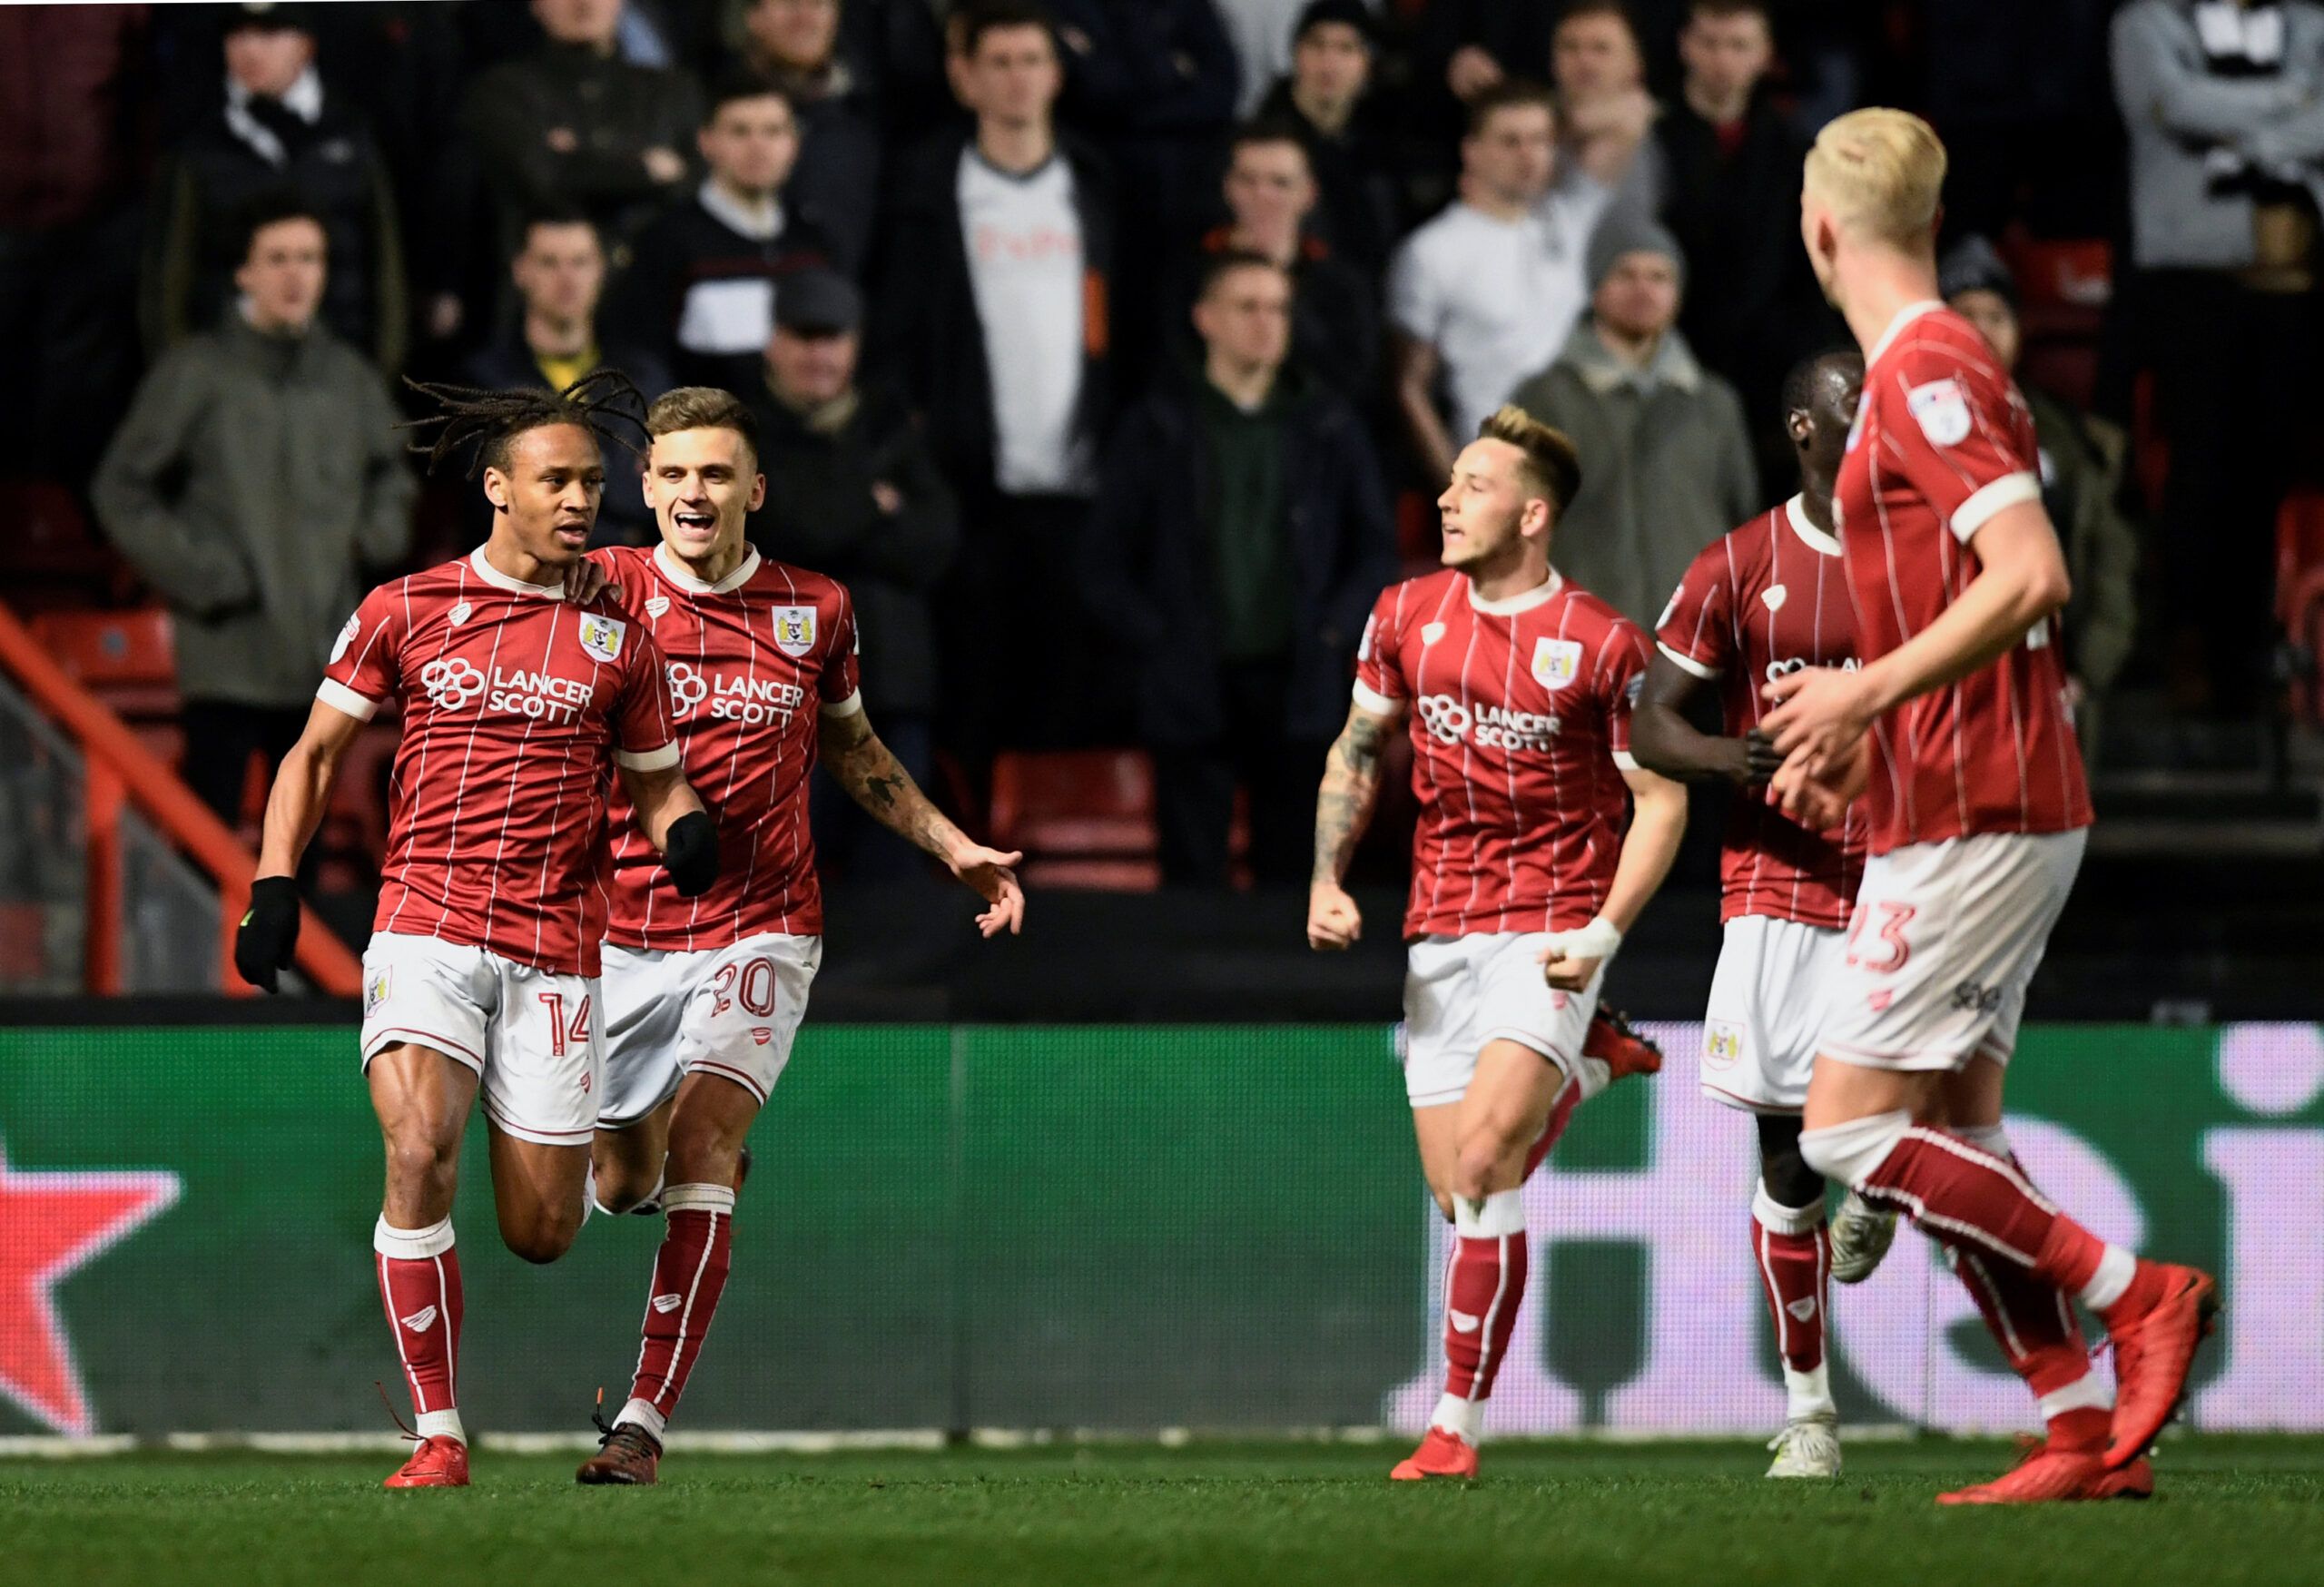 Soccer Football - Championship - Bristol City vs Fulham - Ashton Gate Stadium, Bristol, Britain - February 21, 2018  Bristol City's Bobby Reid celebrates their first goal with team mates   Action Images/Tony O'Brien  EDITORIAL USE ONLY. No use with unauthorized audio, video, data, fixture lists, club/league logos or 